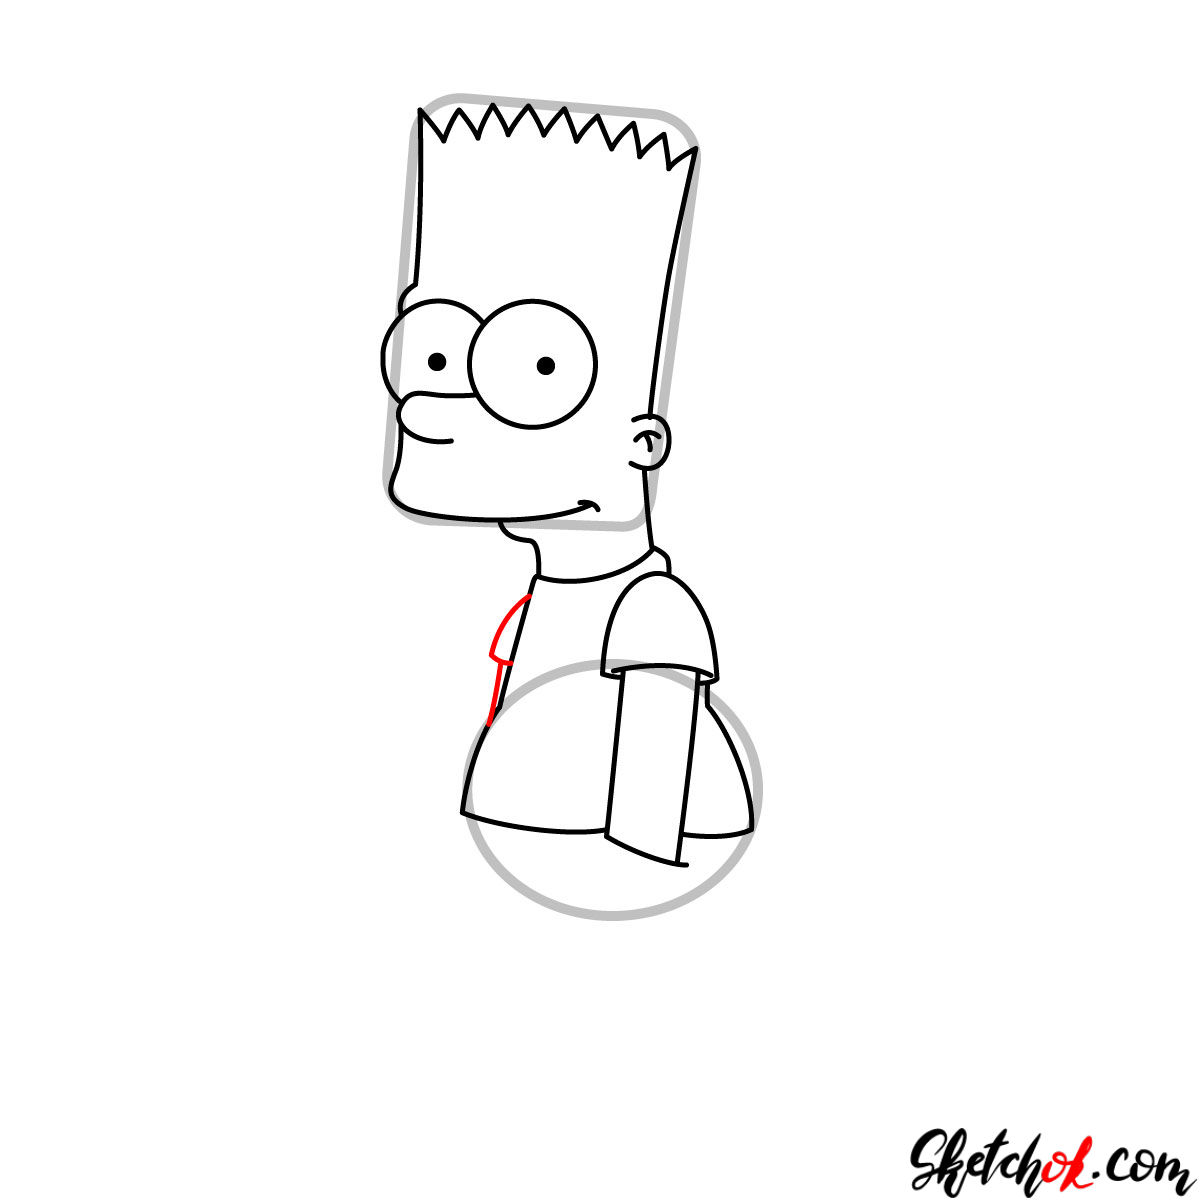 How to draw Bart Simpson - step 06